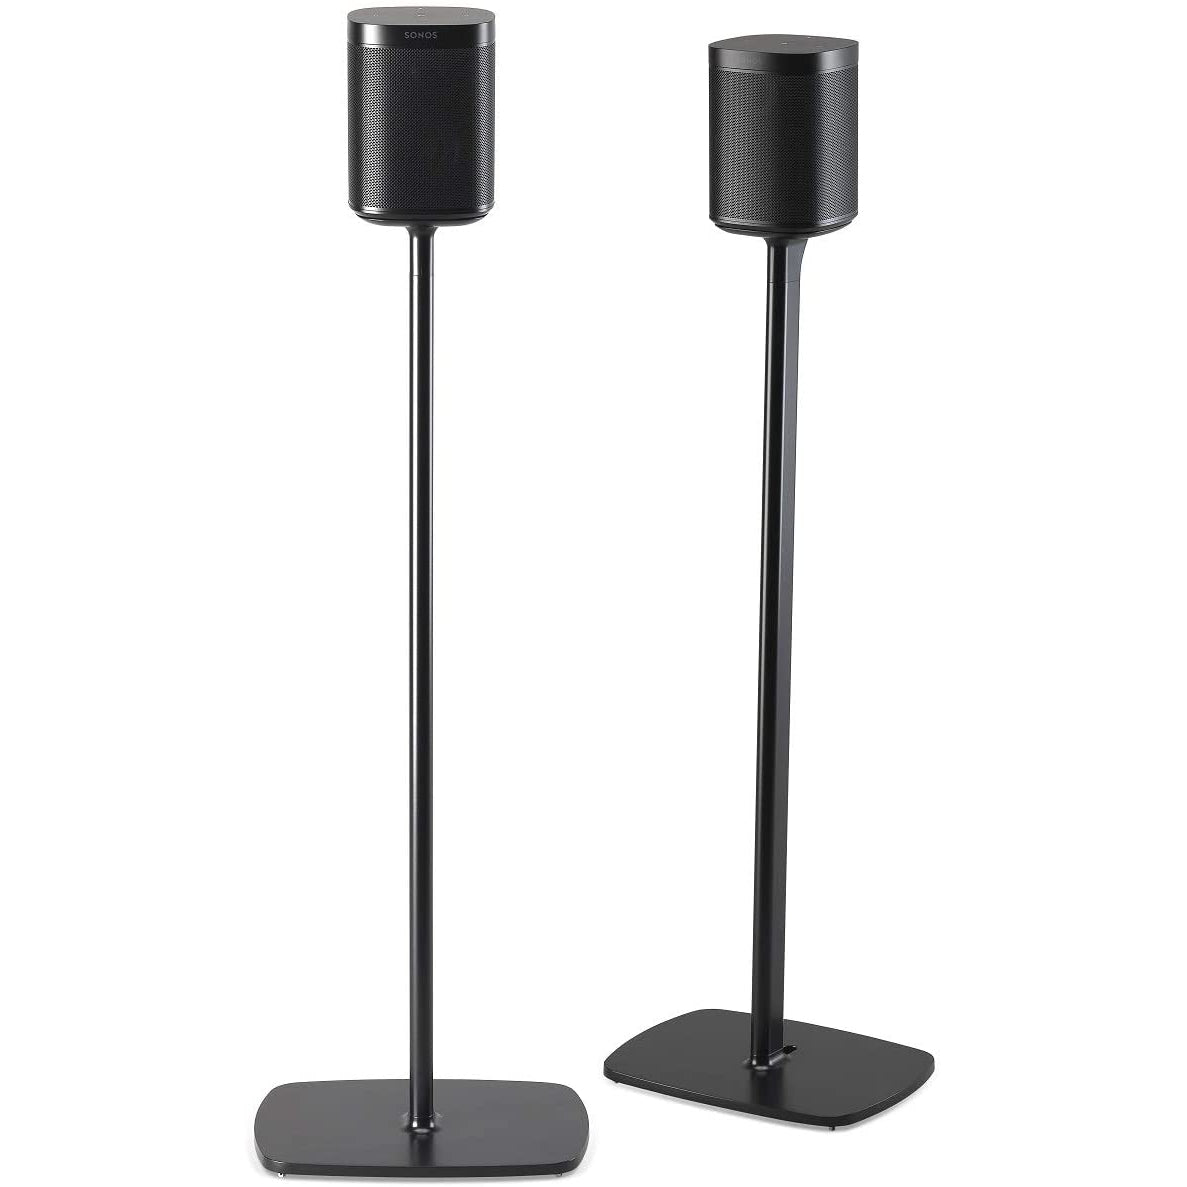 Flexson S1FS2021EU Floor Stands for Sonos One, One SL and Play:1 - Black